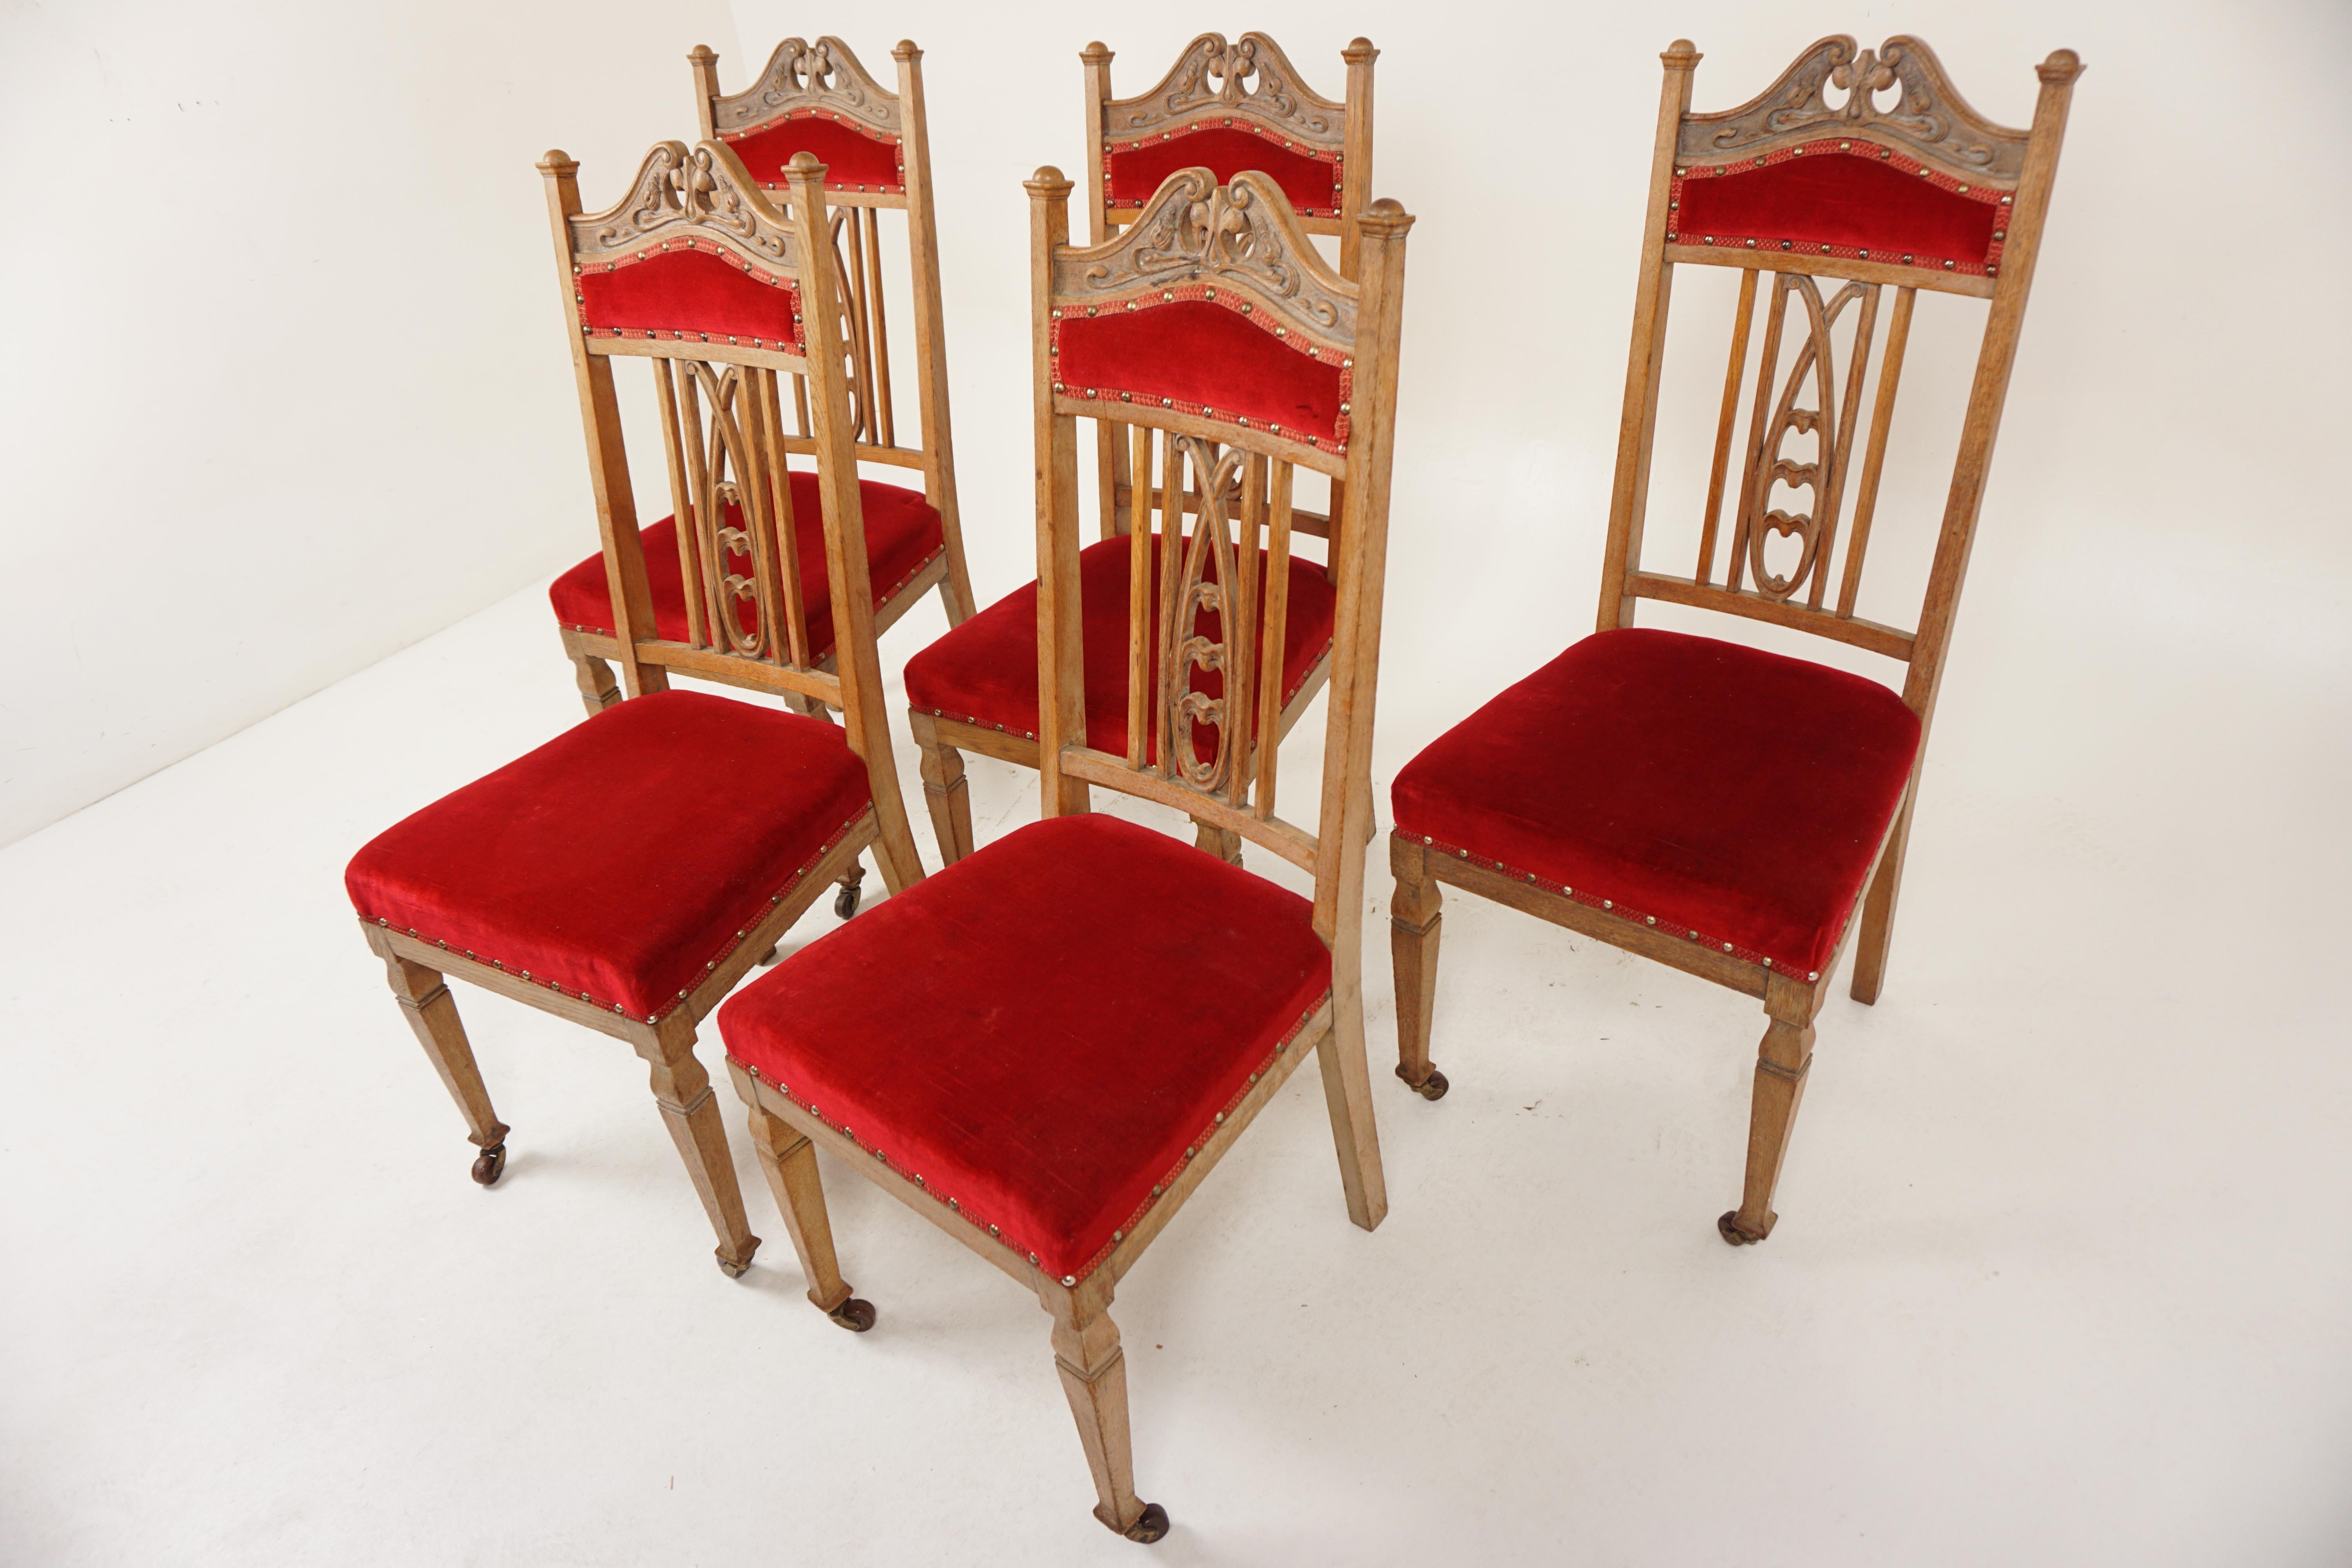 Set of 5 Oak Art Nouveau, Arts & Crafts Dining Chairs, Scotland 1900, H1013

Solid Oak
Original finish
The top splat with art nouveau carving
Flanked by a pair of rectangular upright supports with rounded top
Padded support to the back with four